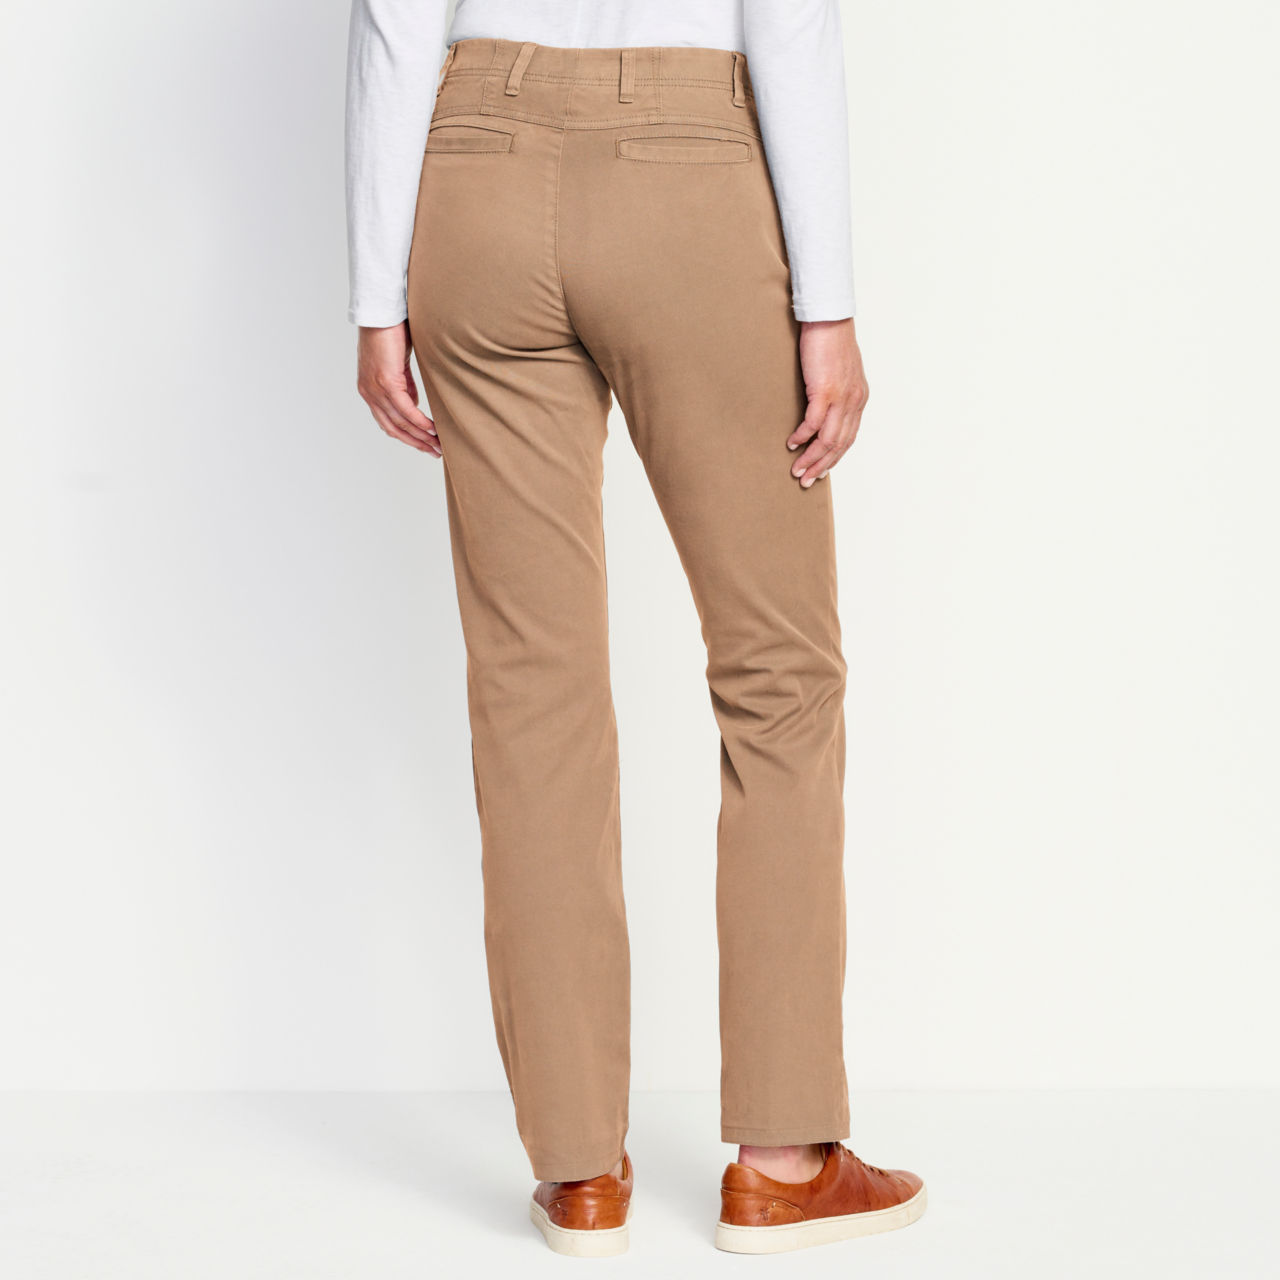 Everyday Chino Natural Fit Straight-Leg Pants -  image number 2